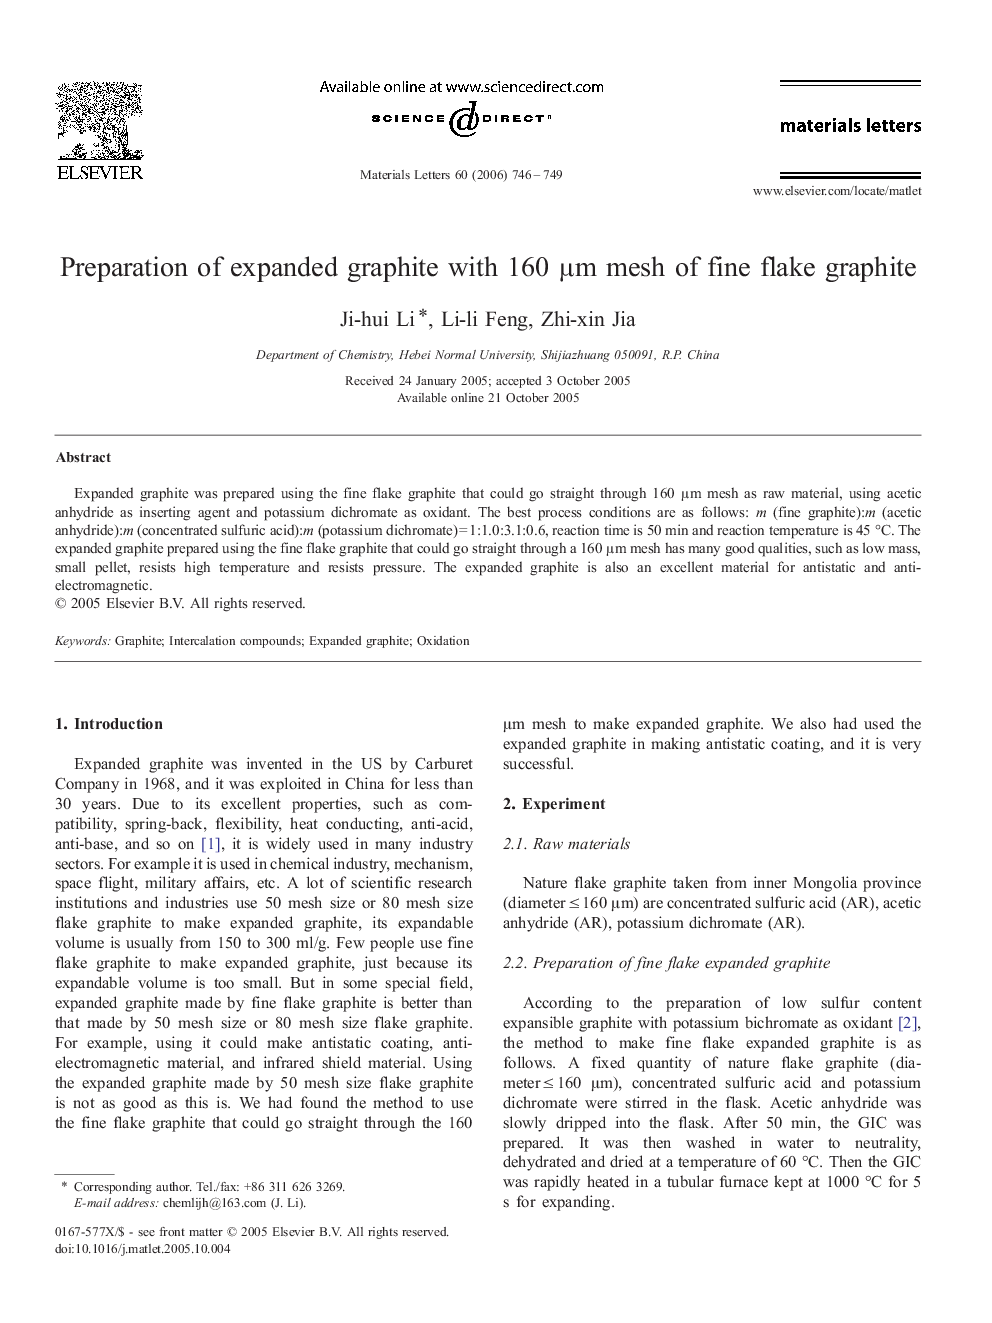 Preparation of expanded graphite with 160 μm mesh of fine flake graphite